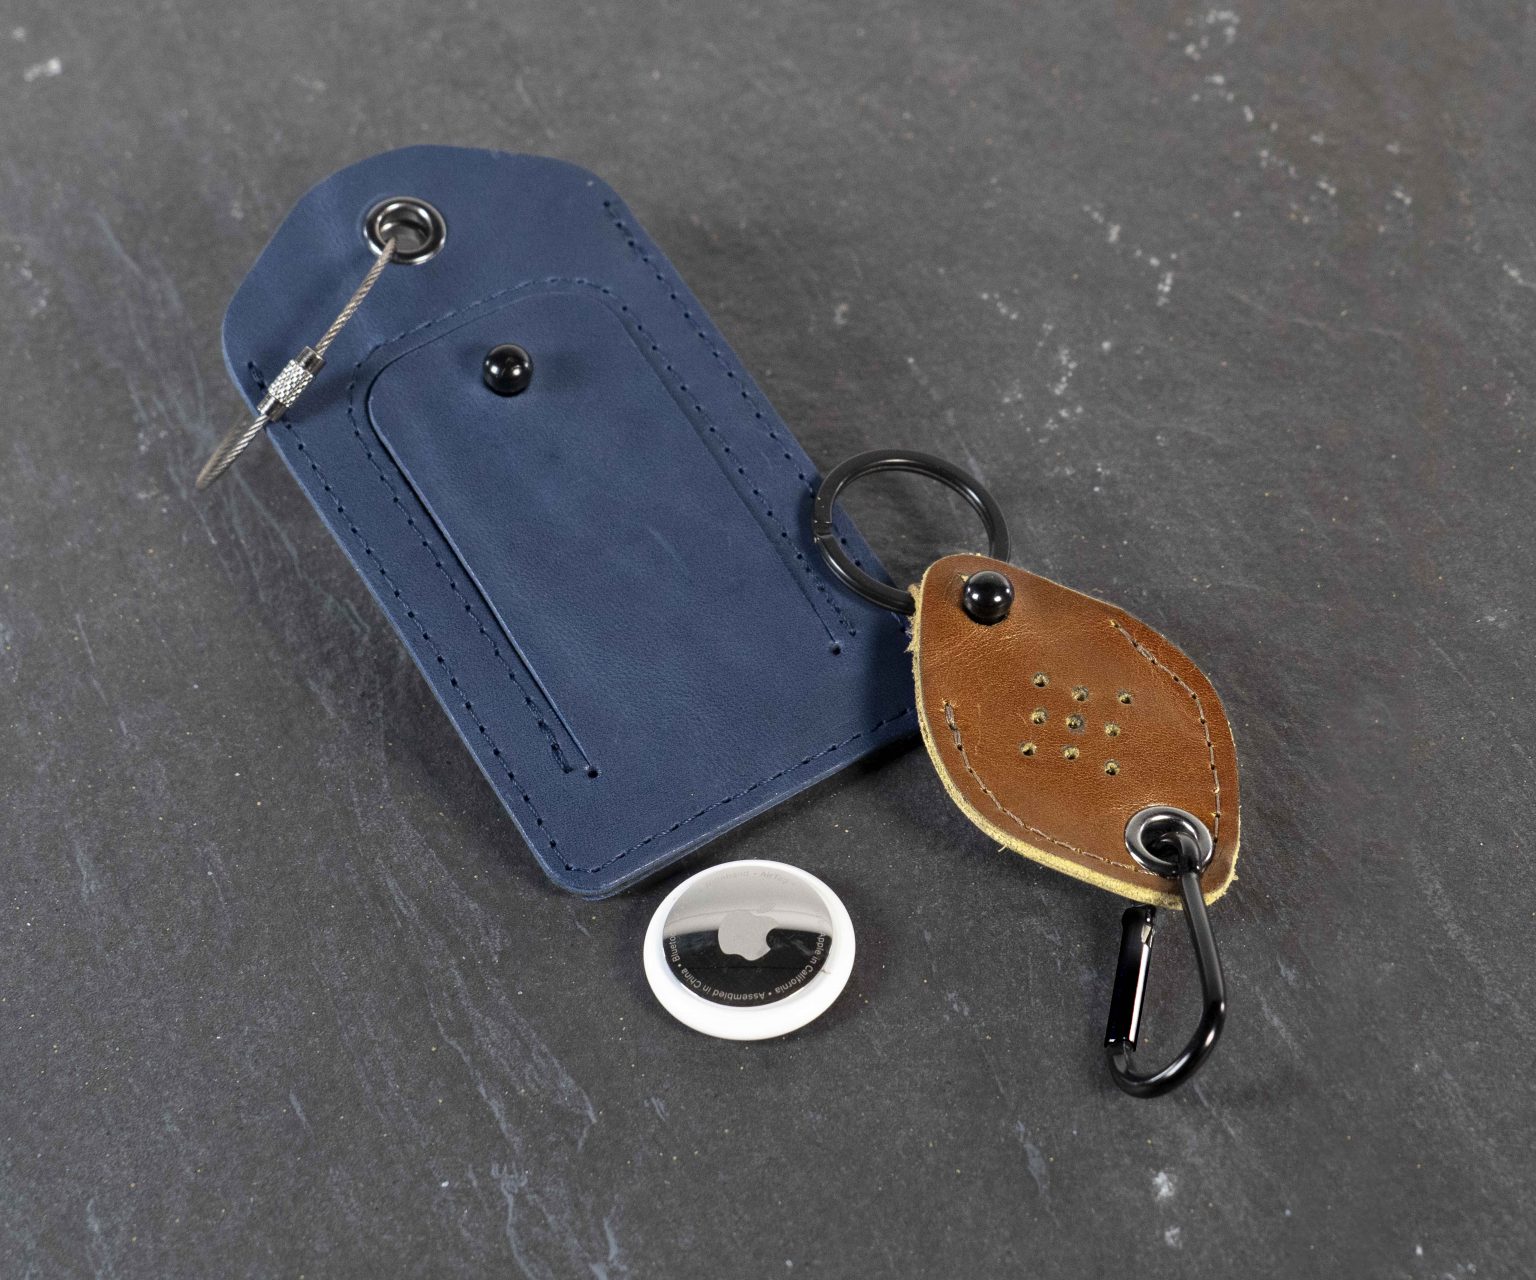 New AirTag accessories from WaterField Designs: AirTag owners just got two more options for actually using their trackers.